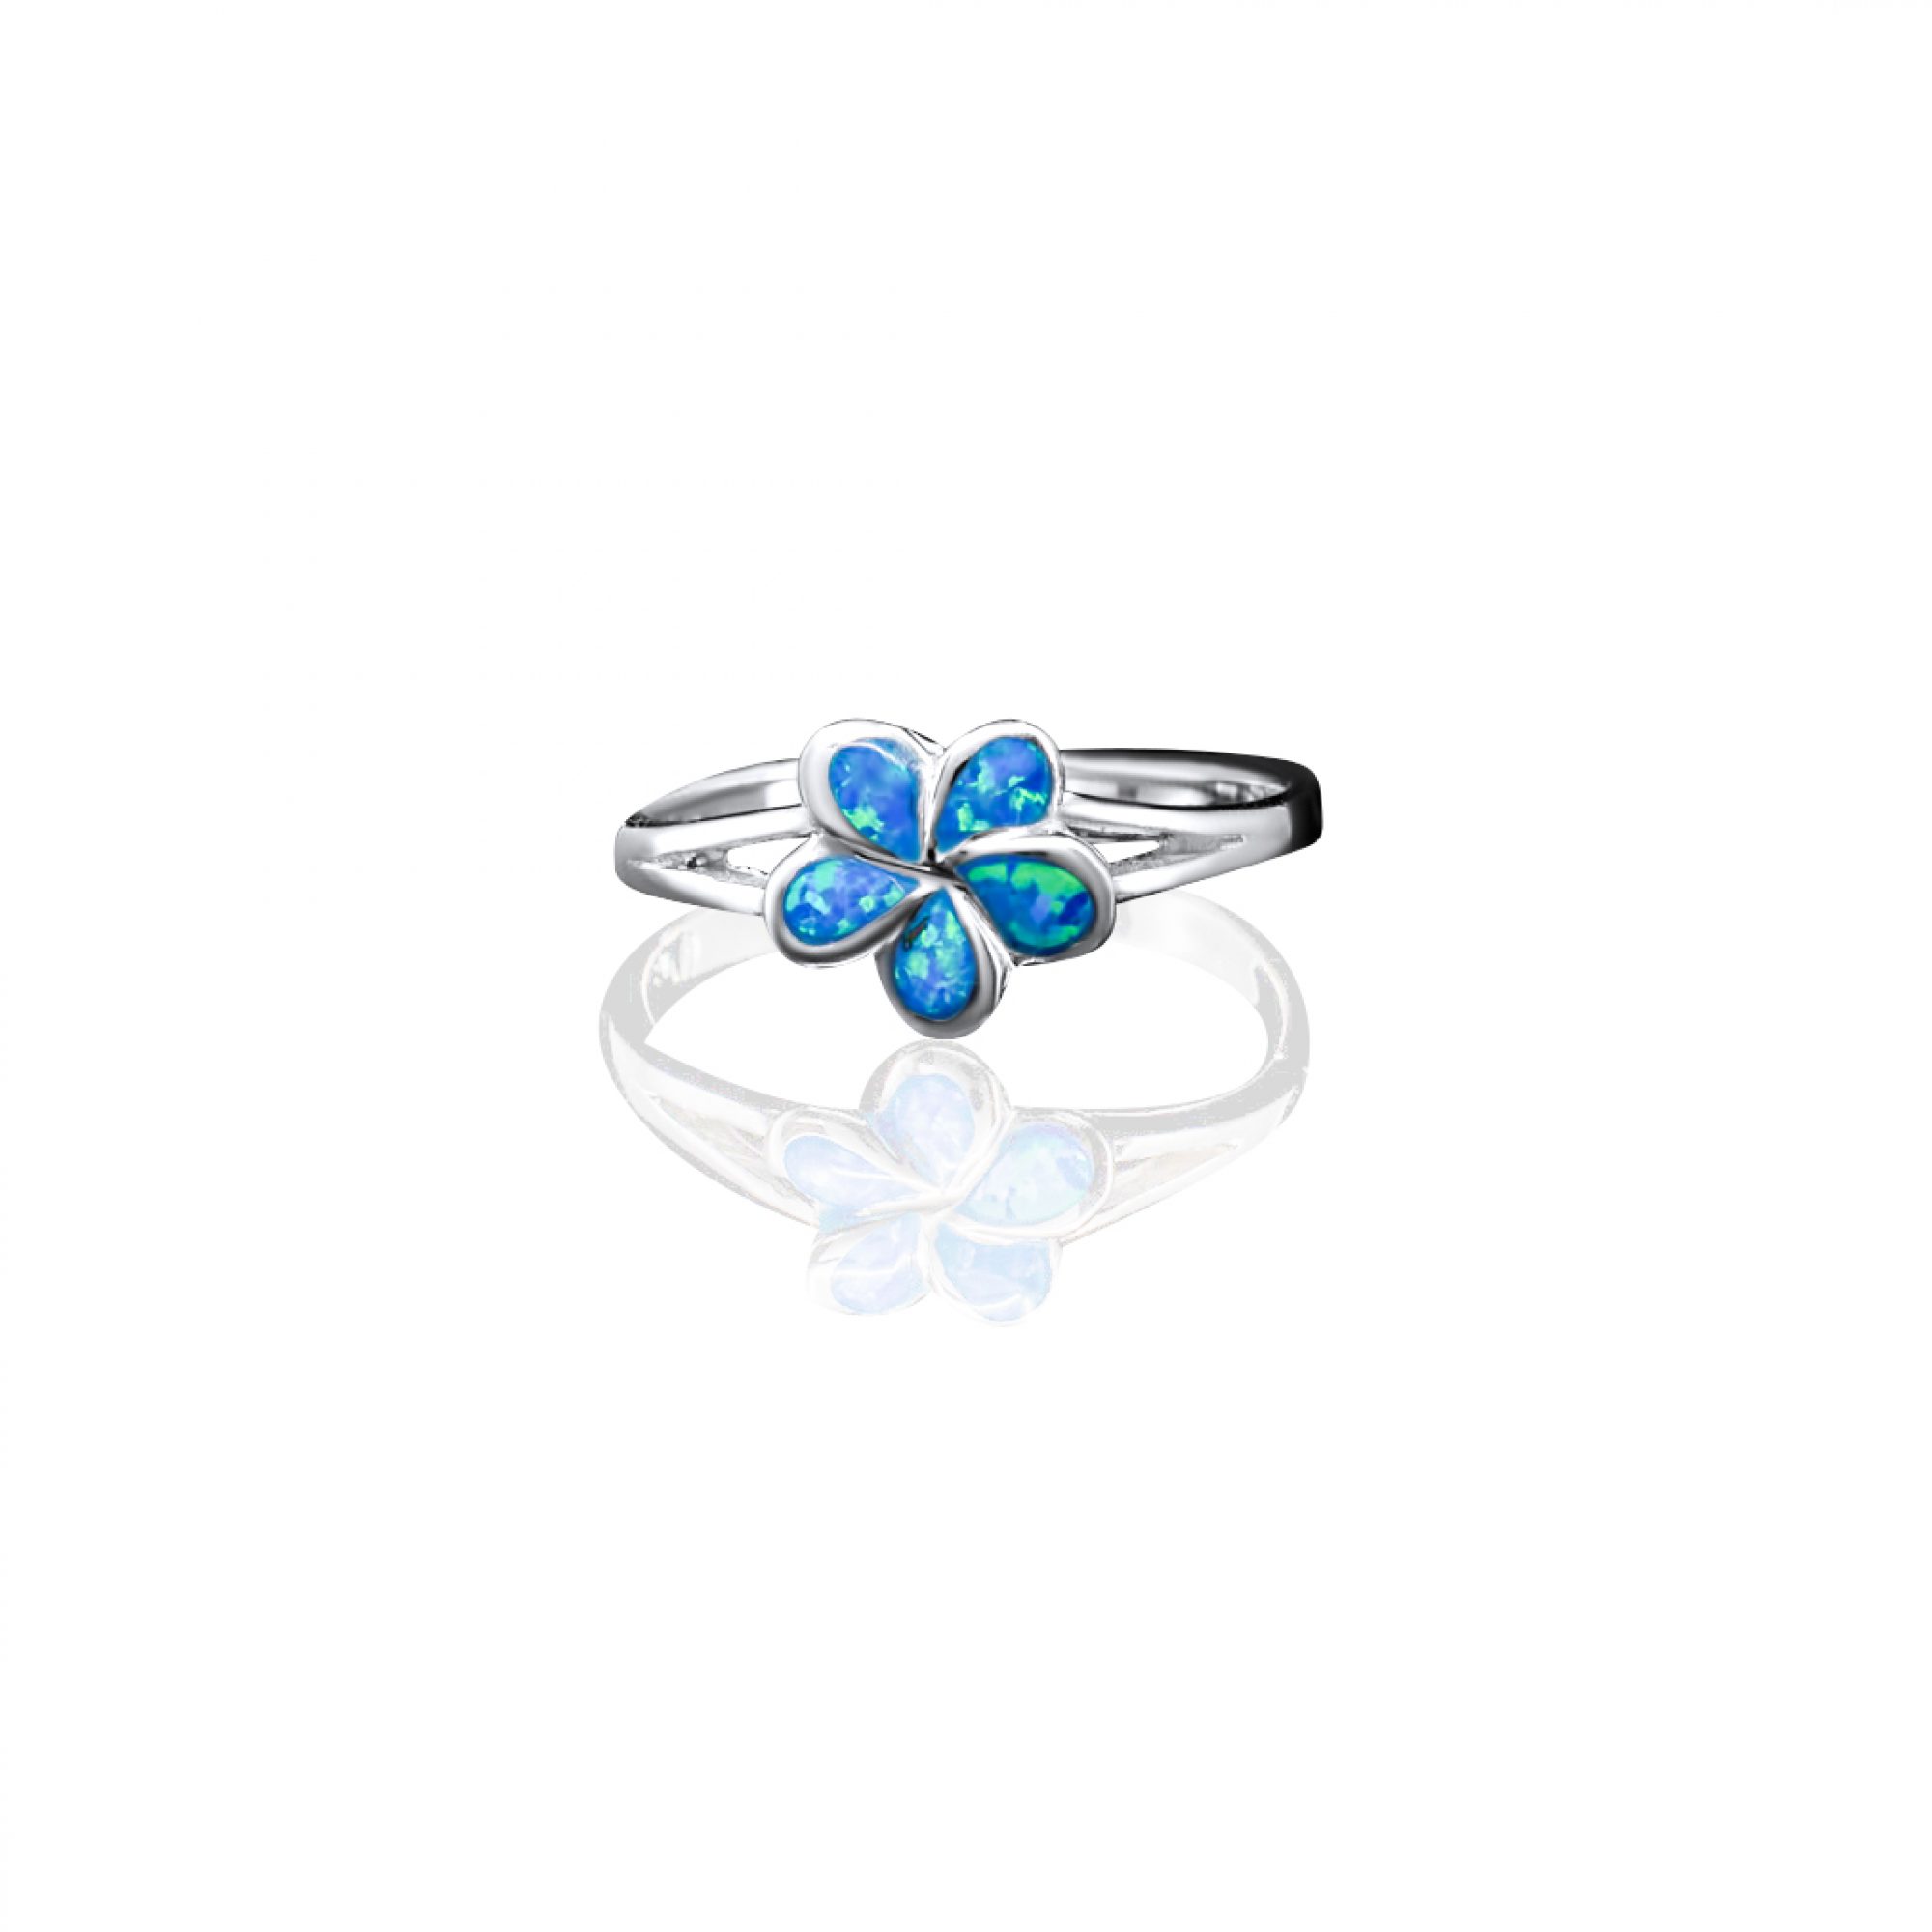 Silver flower ring with opal stones